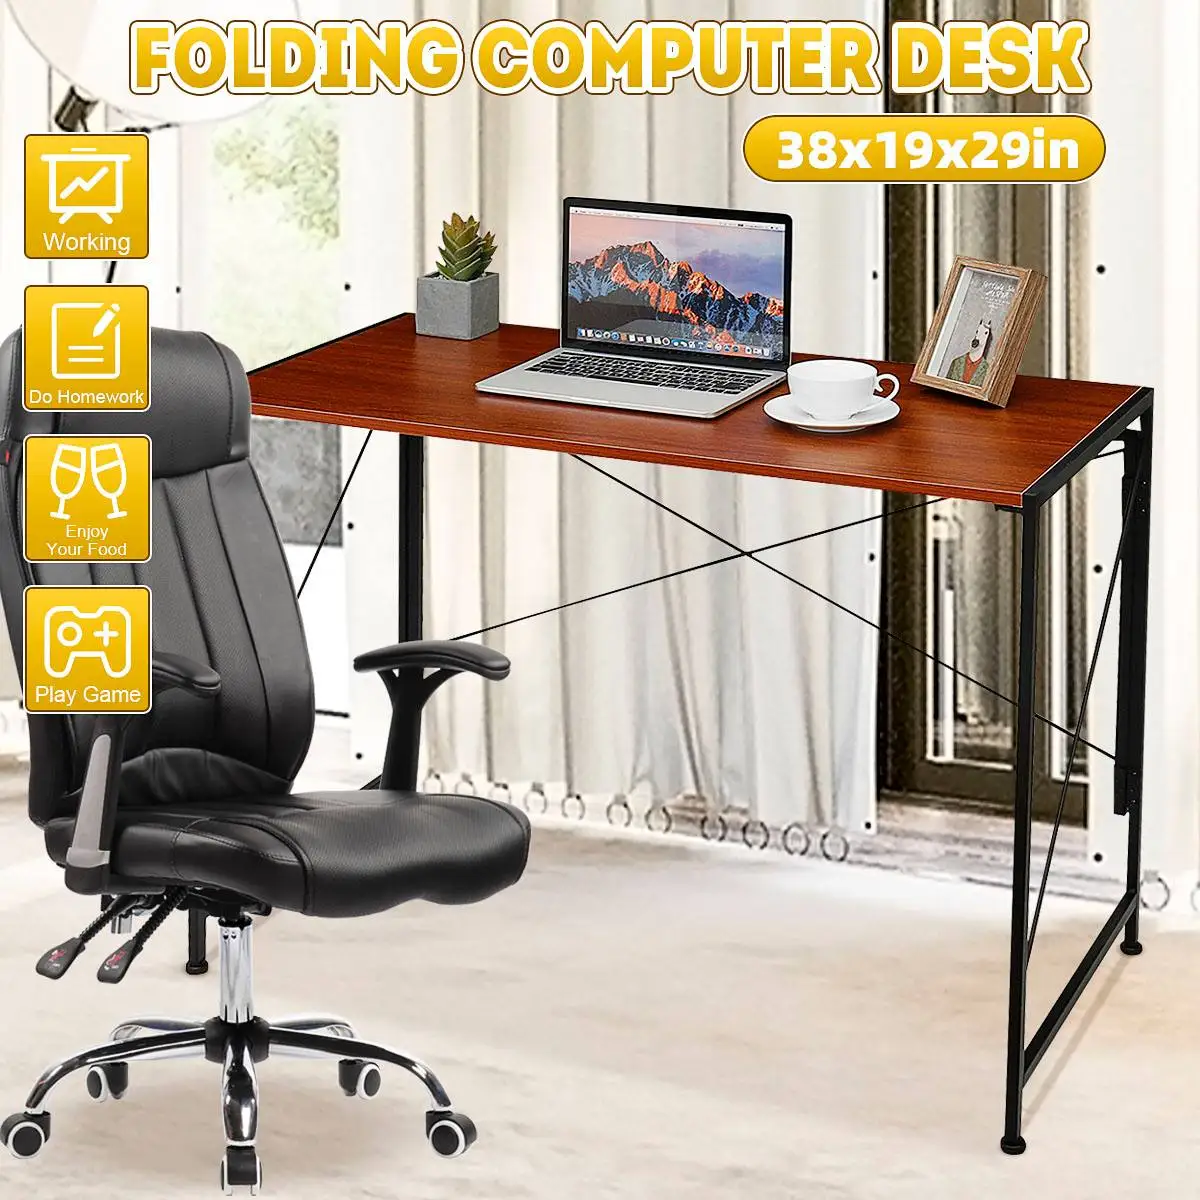 US Fast-shipping Writing Computer Desk Modern Simple Study Desk Industrial Style Folding Table for Home Office Notebook Desk